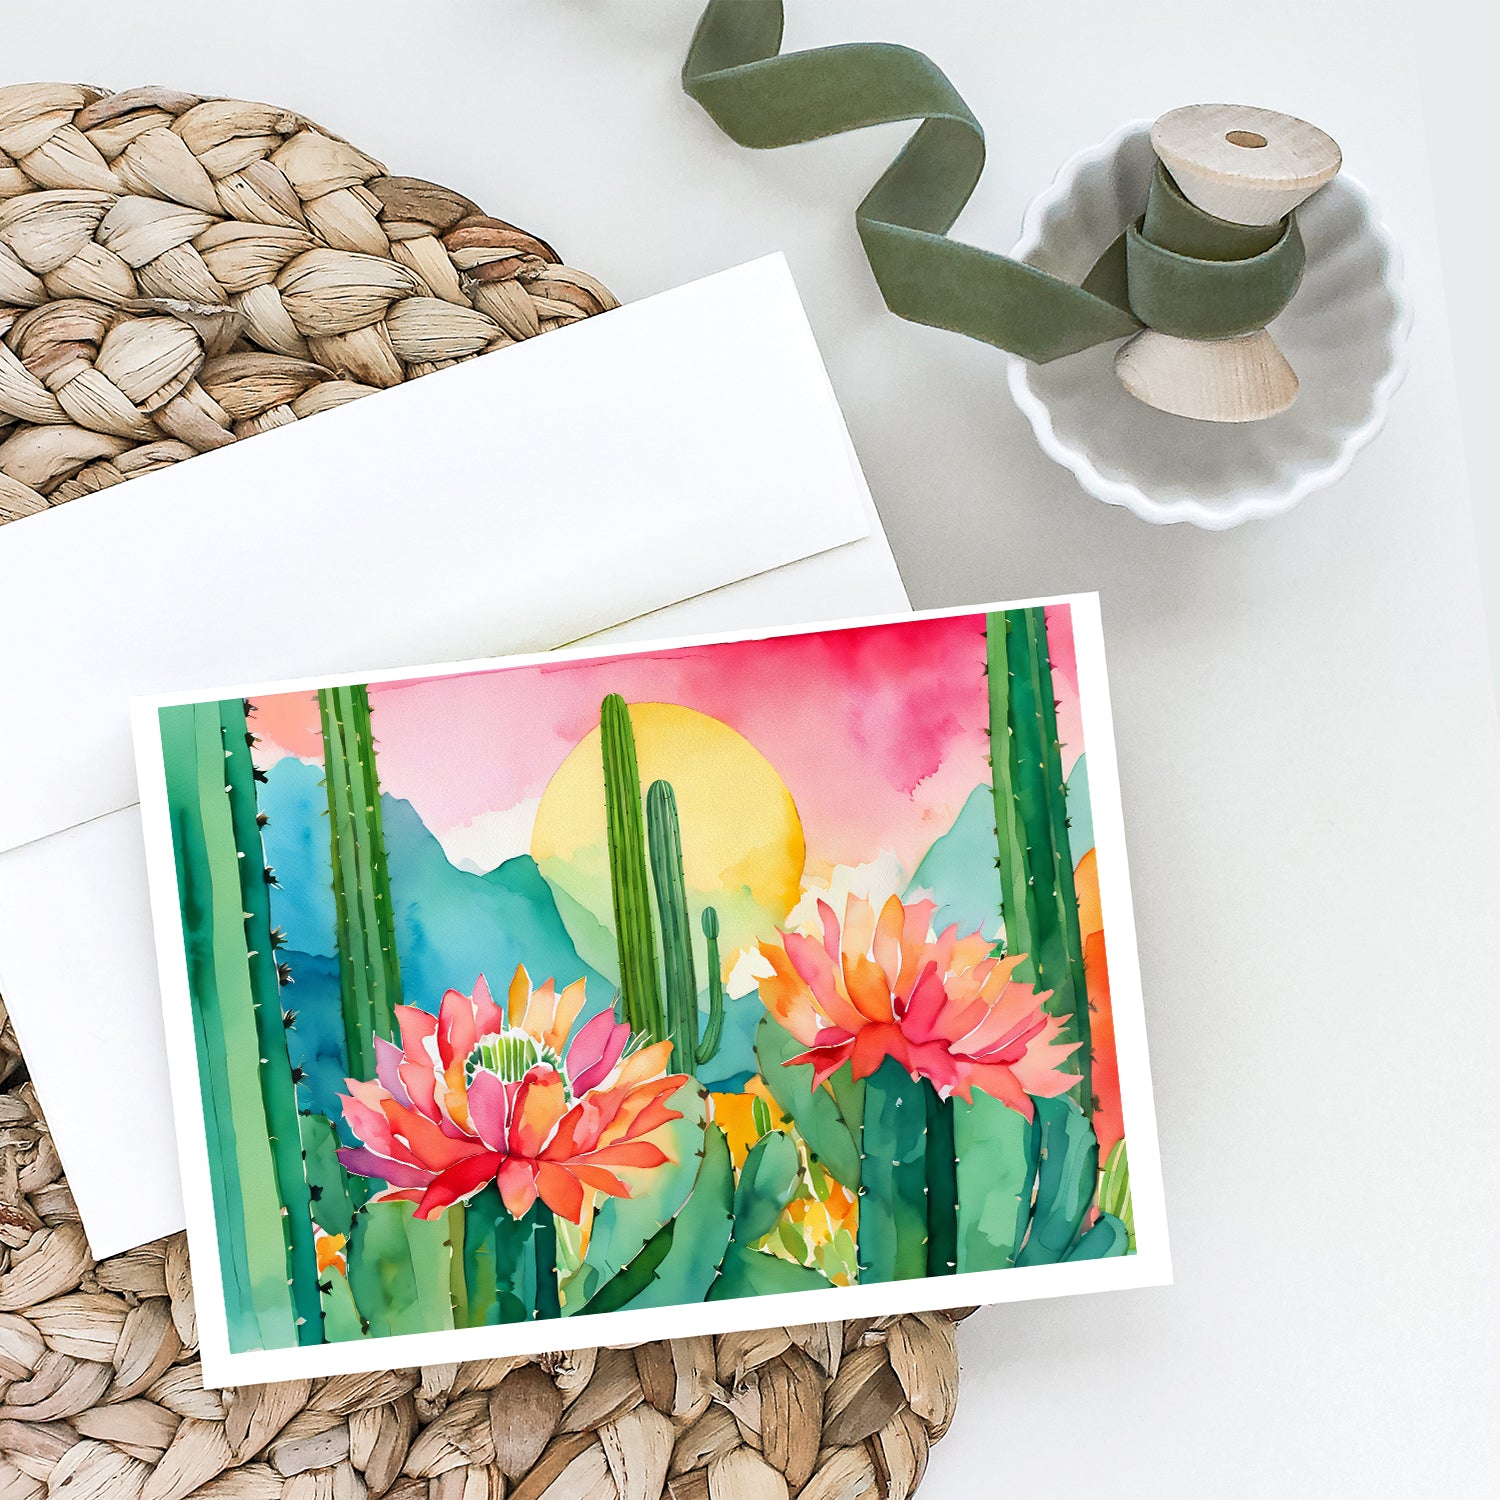 Arizona Saguaro Cactus Blossom in Watercolor Greeting Cards and Envelopes Pack of 8